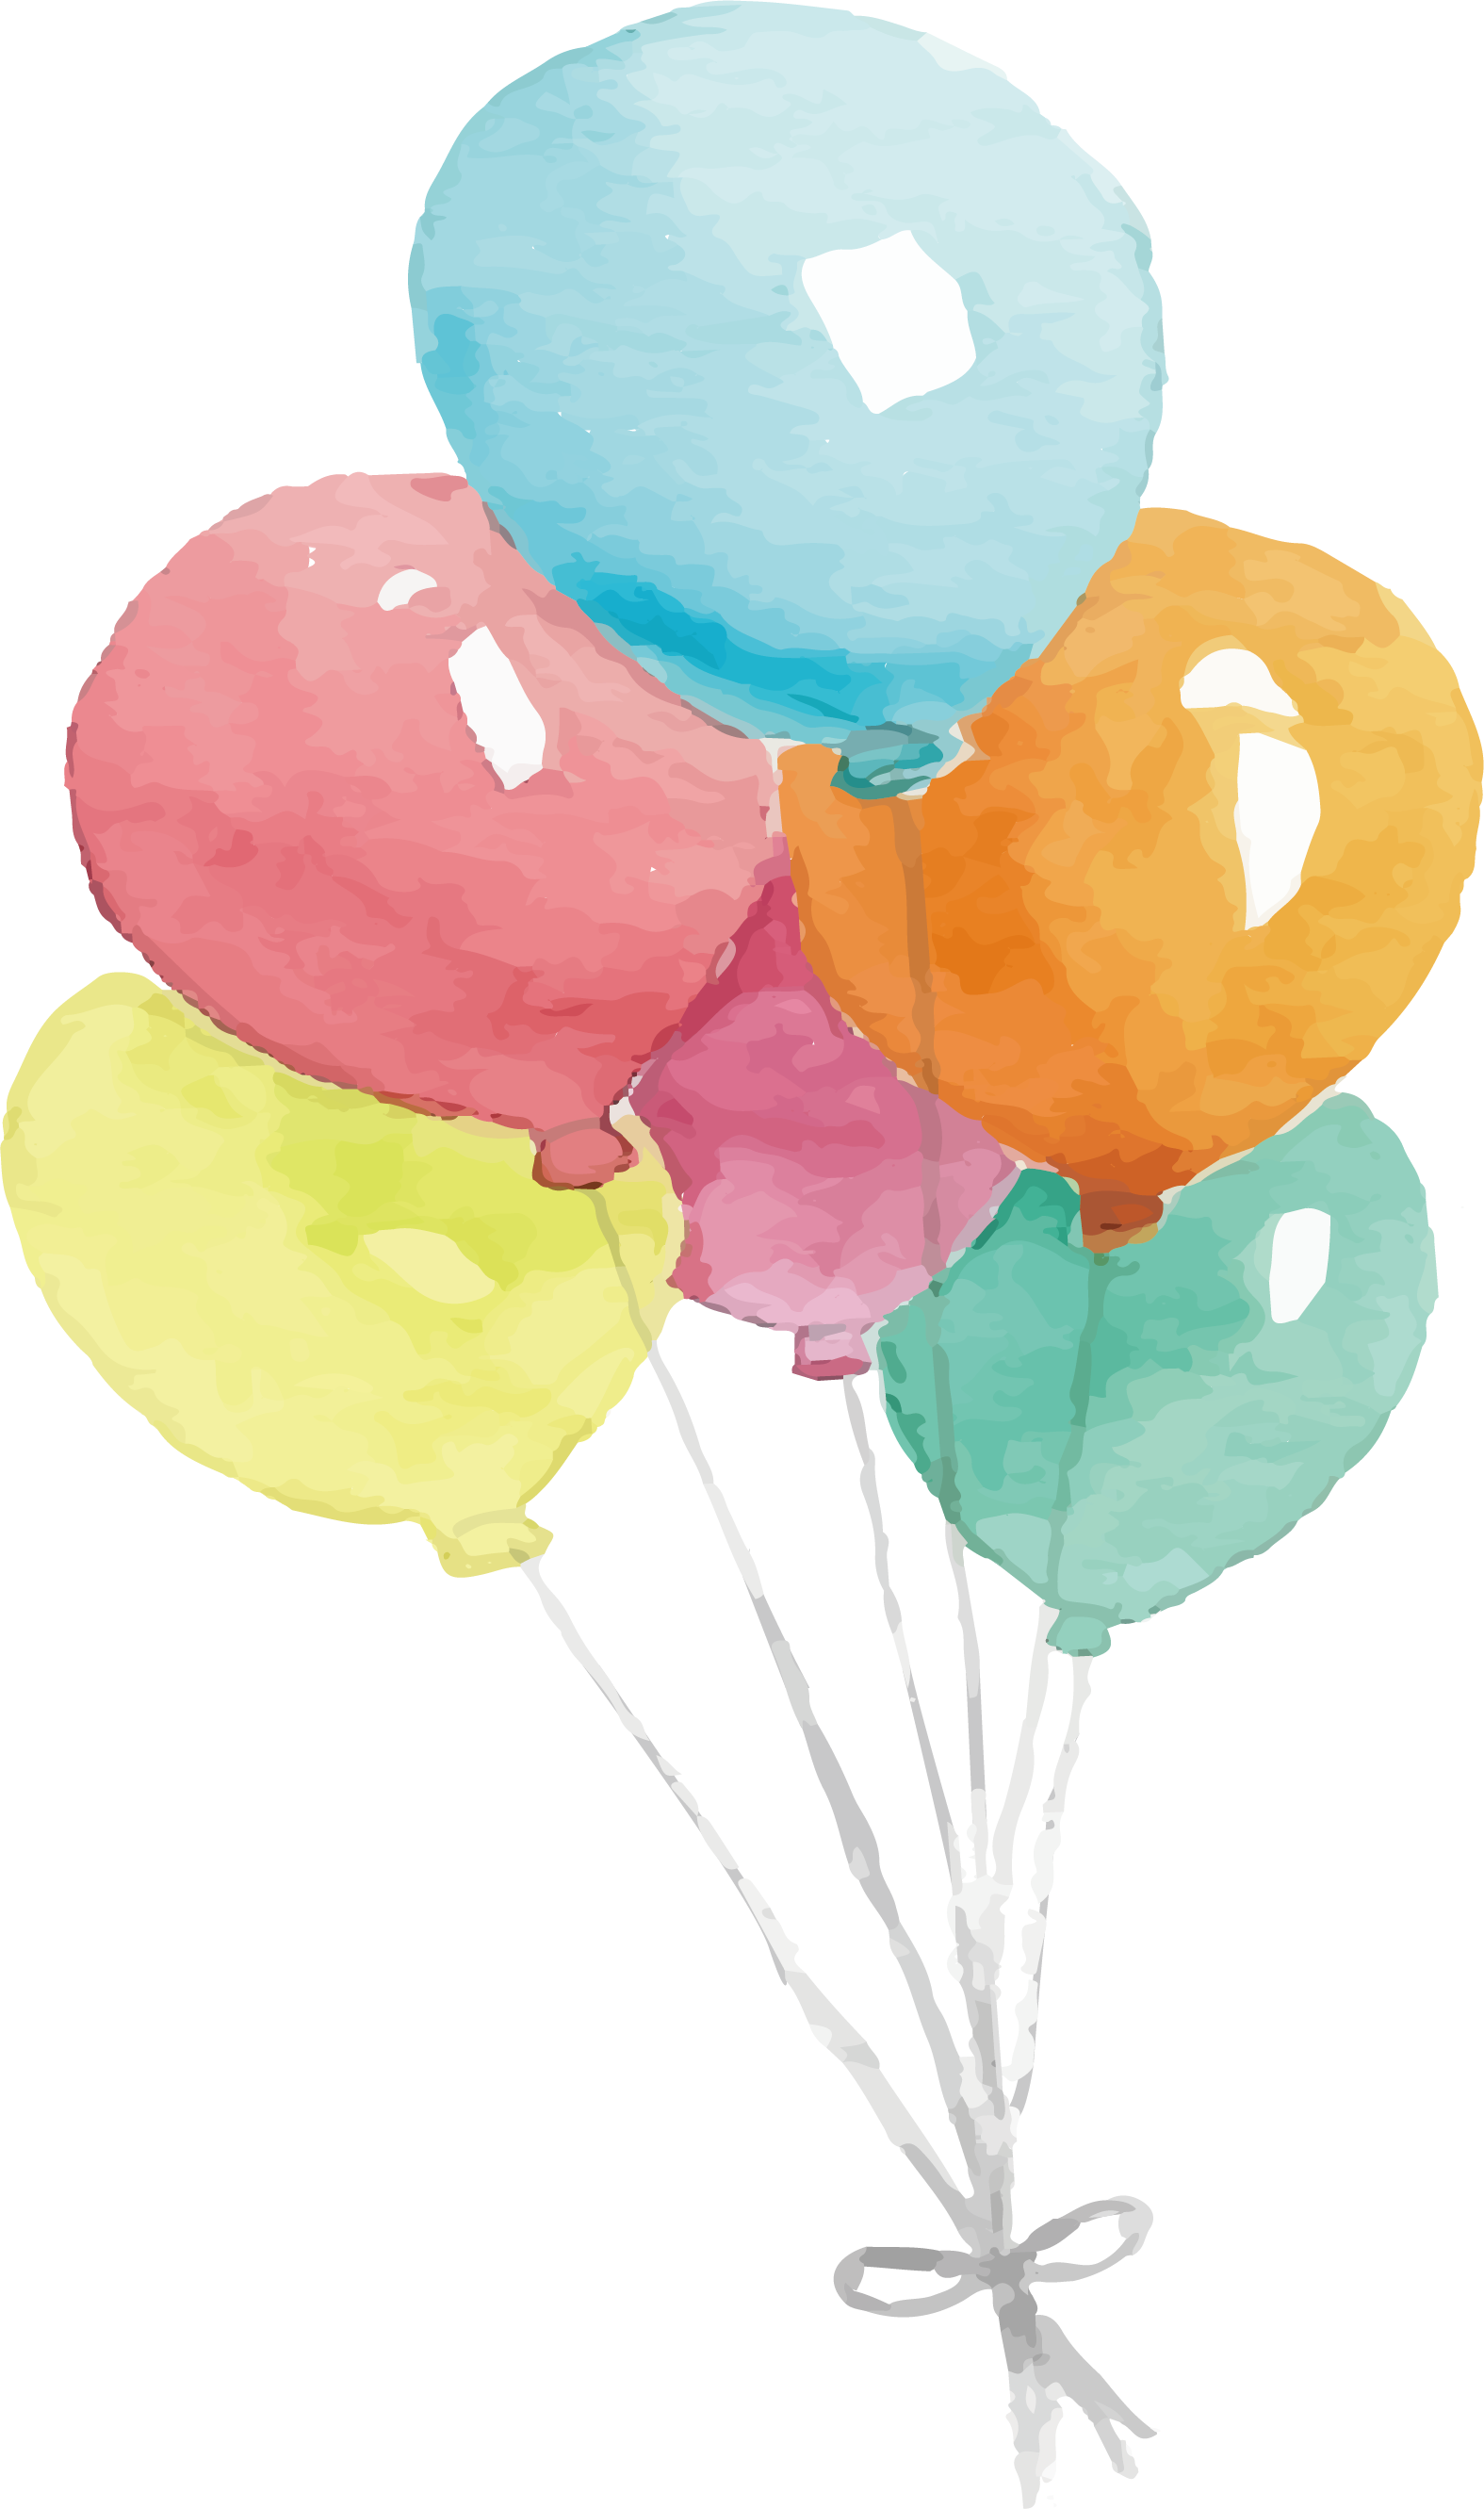 Watercolor Balloon Painting PNG Download Free Clipart